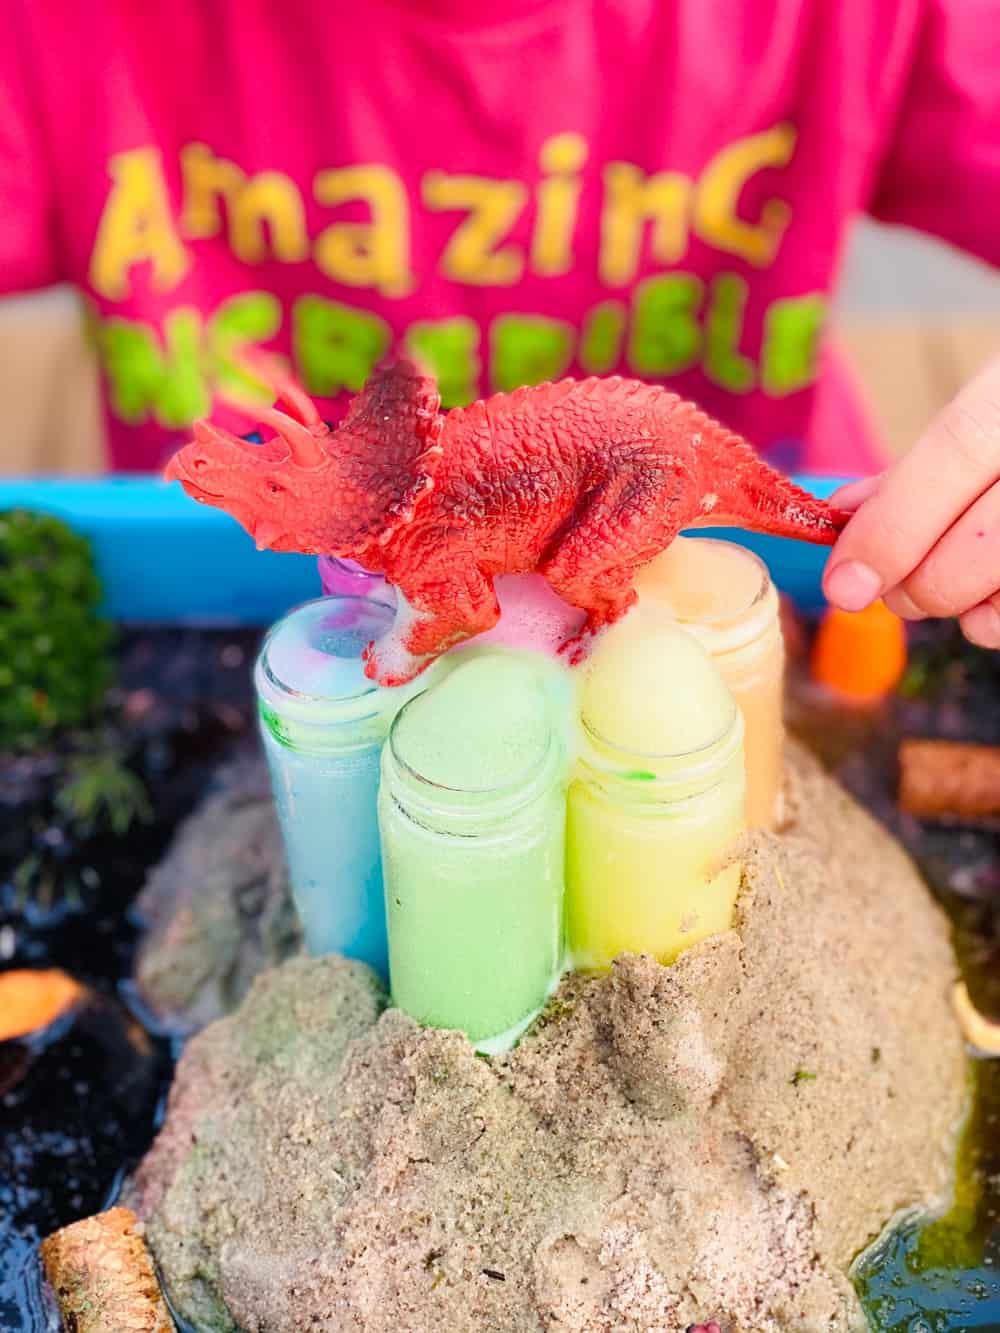 rainbow baking soda volcano science experiment for kids with toy dinosaur on top